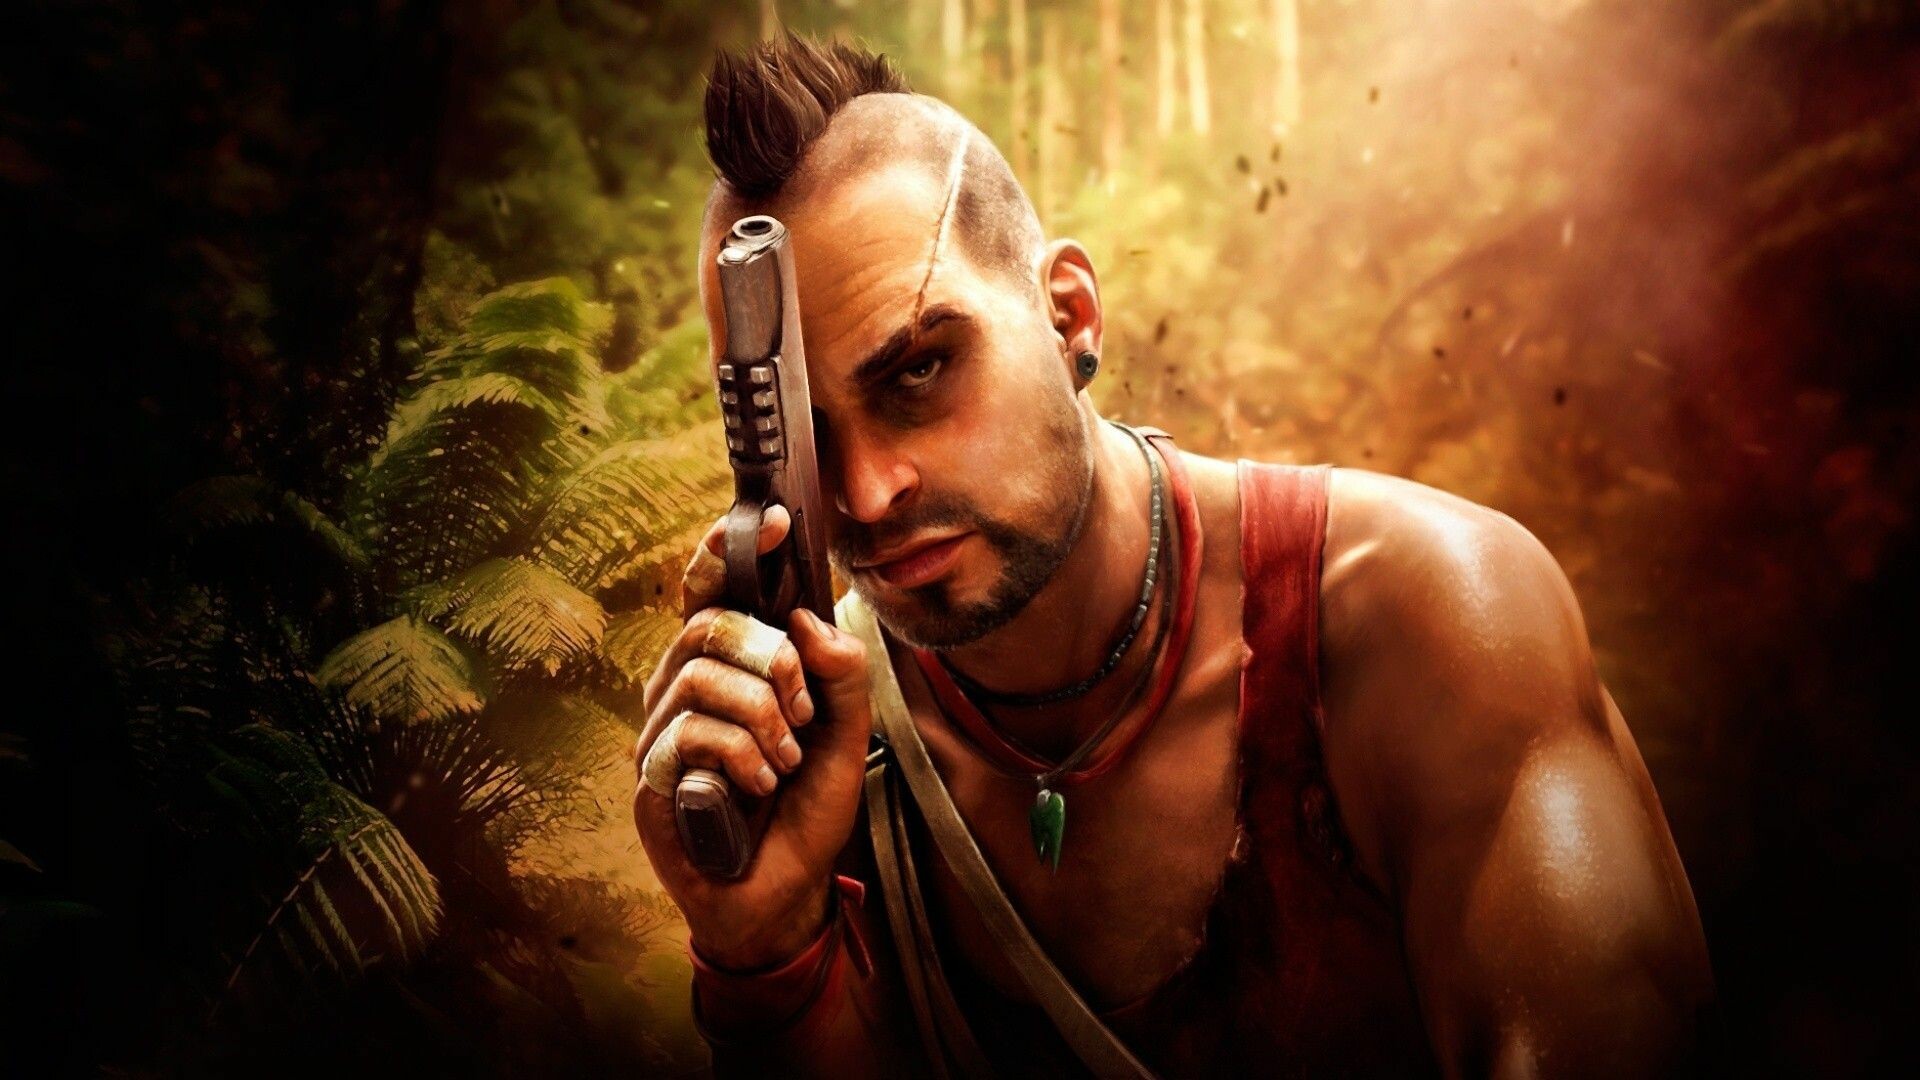 Far Cry 3: Vaas, A character from Ubisoft's video game franchise. 1920x1080 Full HD Wallpaper.